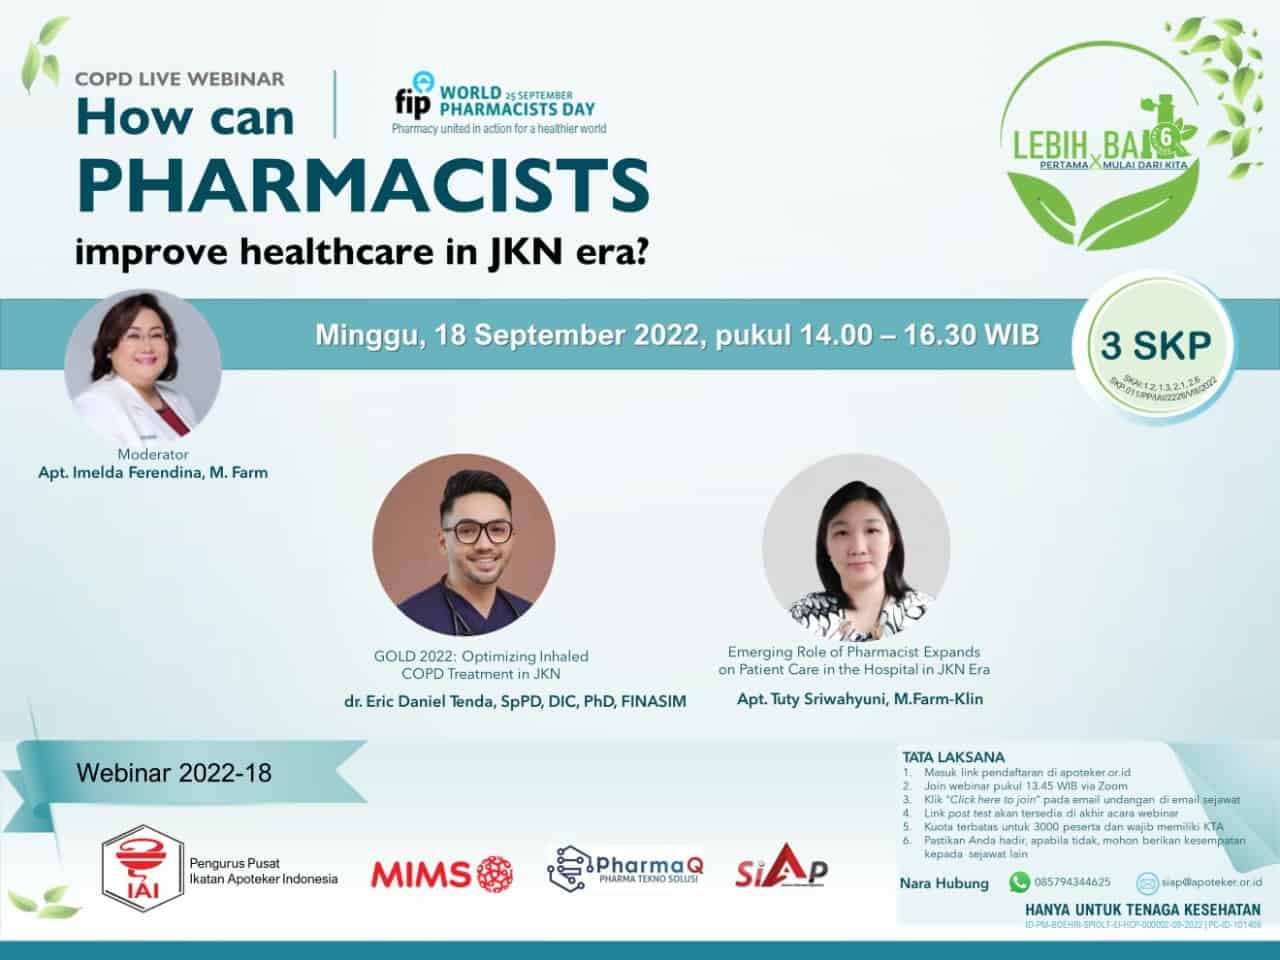 How can Pharmacists Improve Healthcare in JKN Era?